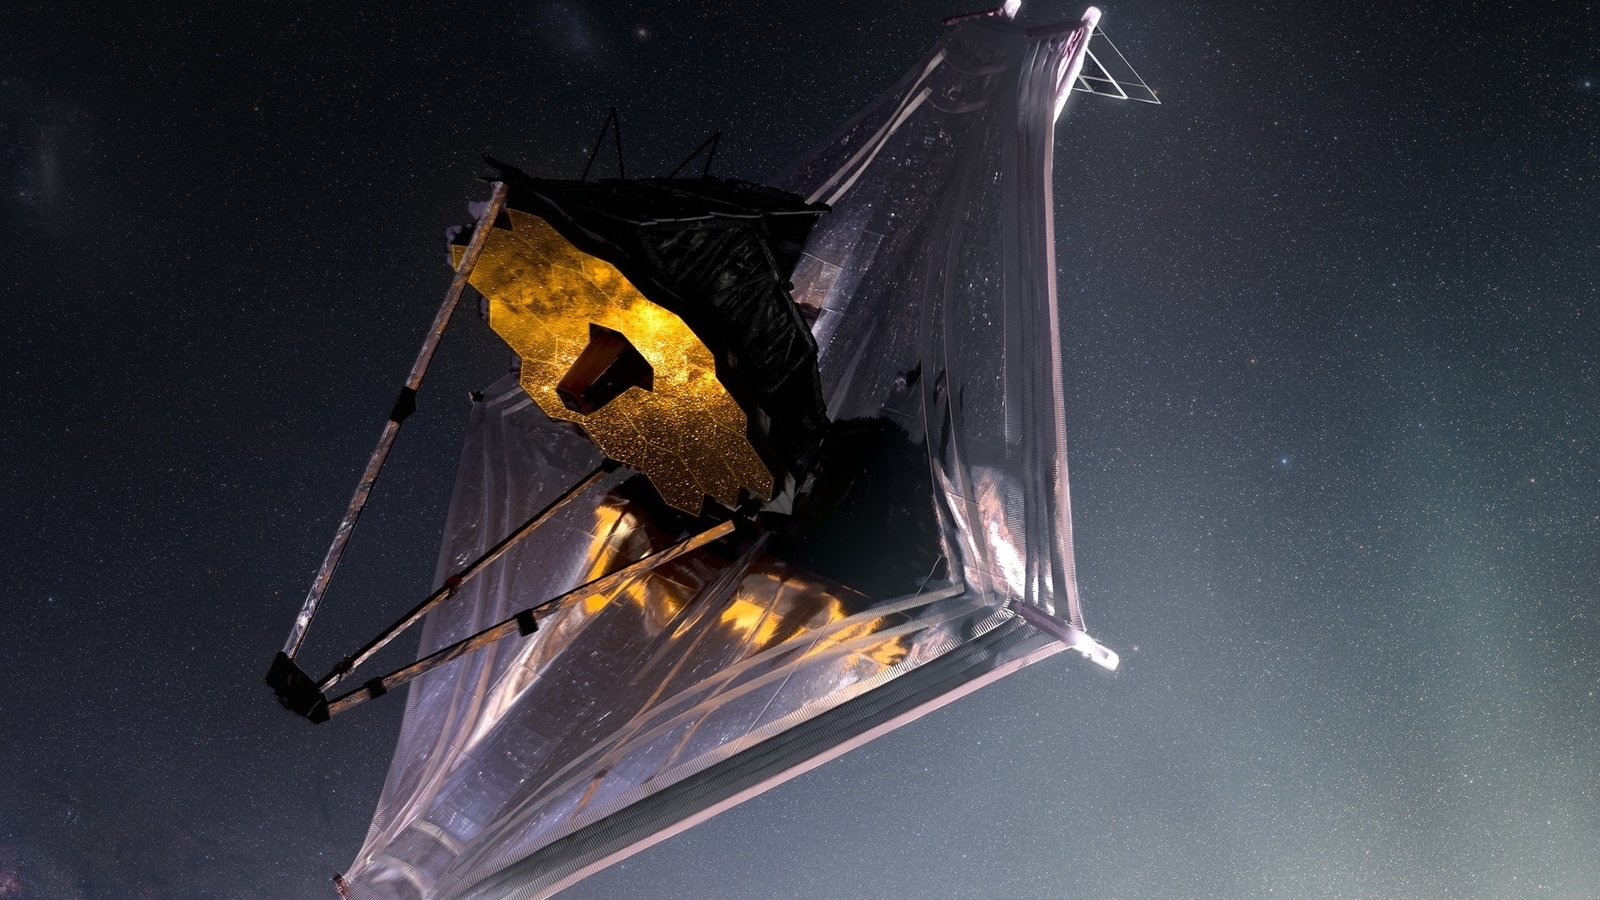 Two Weeks In, the Webb Space Telescope Is Reshaping Astronomy